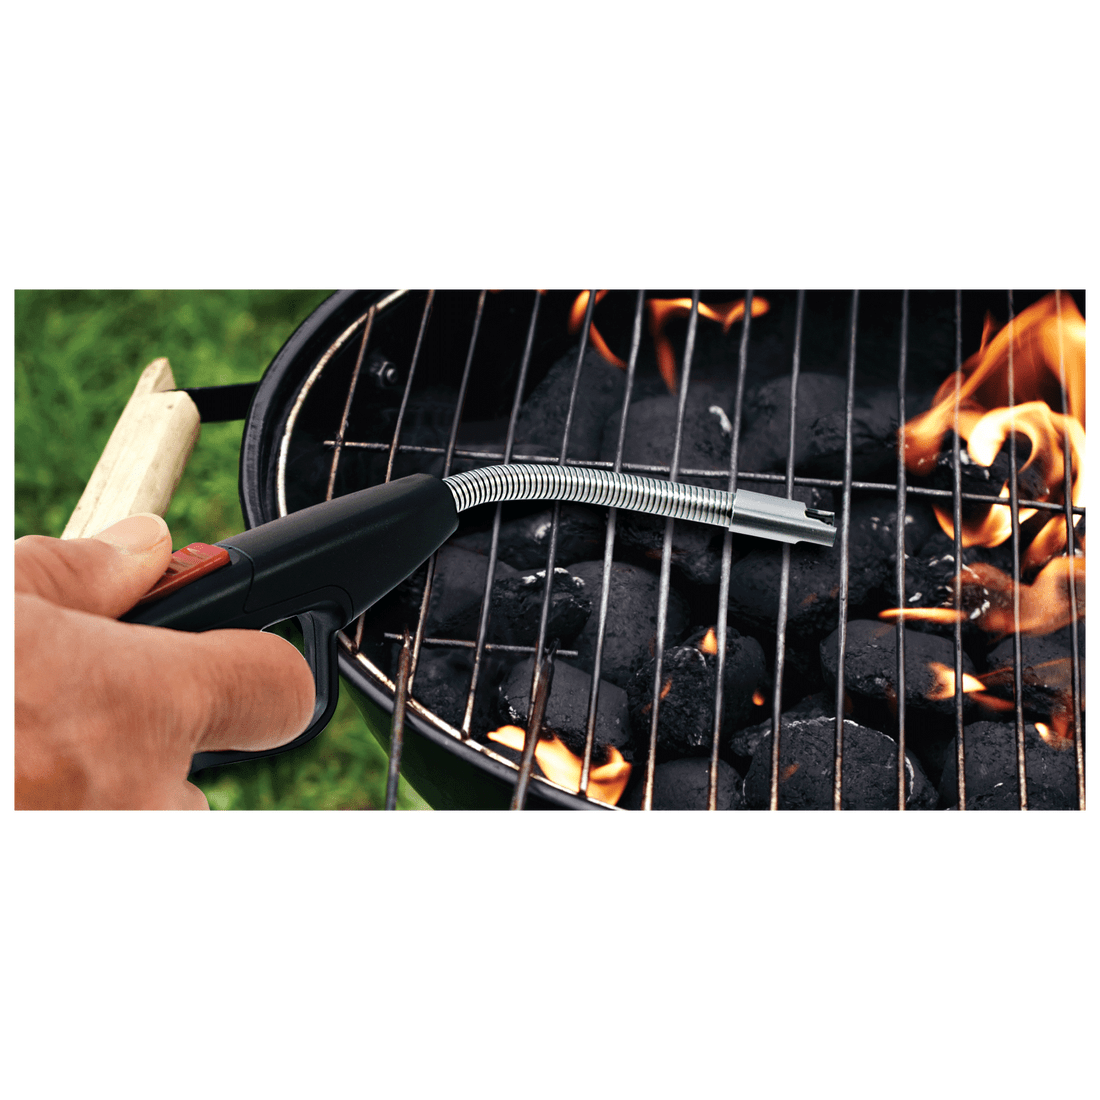 Rechargeable USB SmartIgnition Eco-Friendly Candle Grill BBQ Lighter with Bendable Neck - Pre-Order